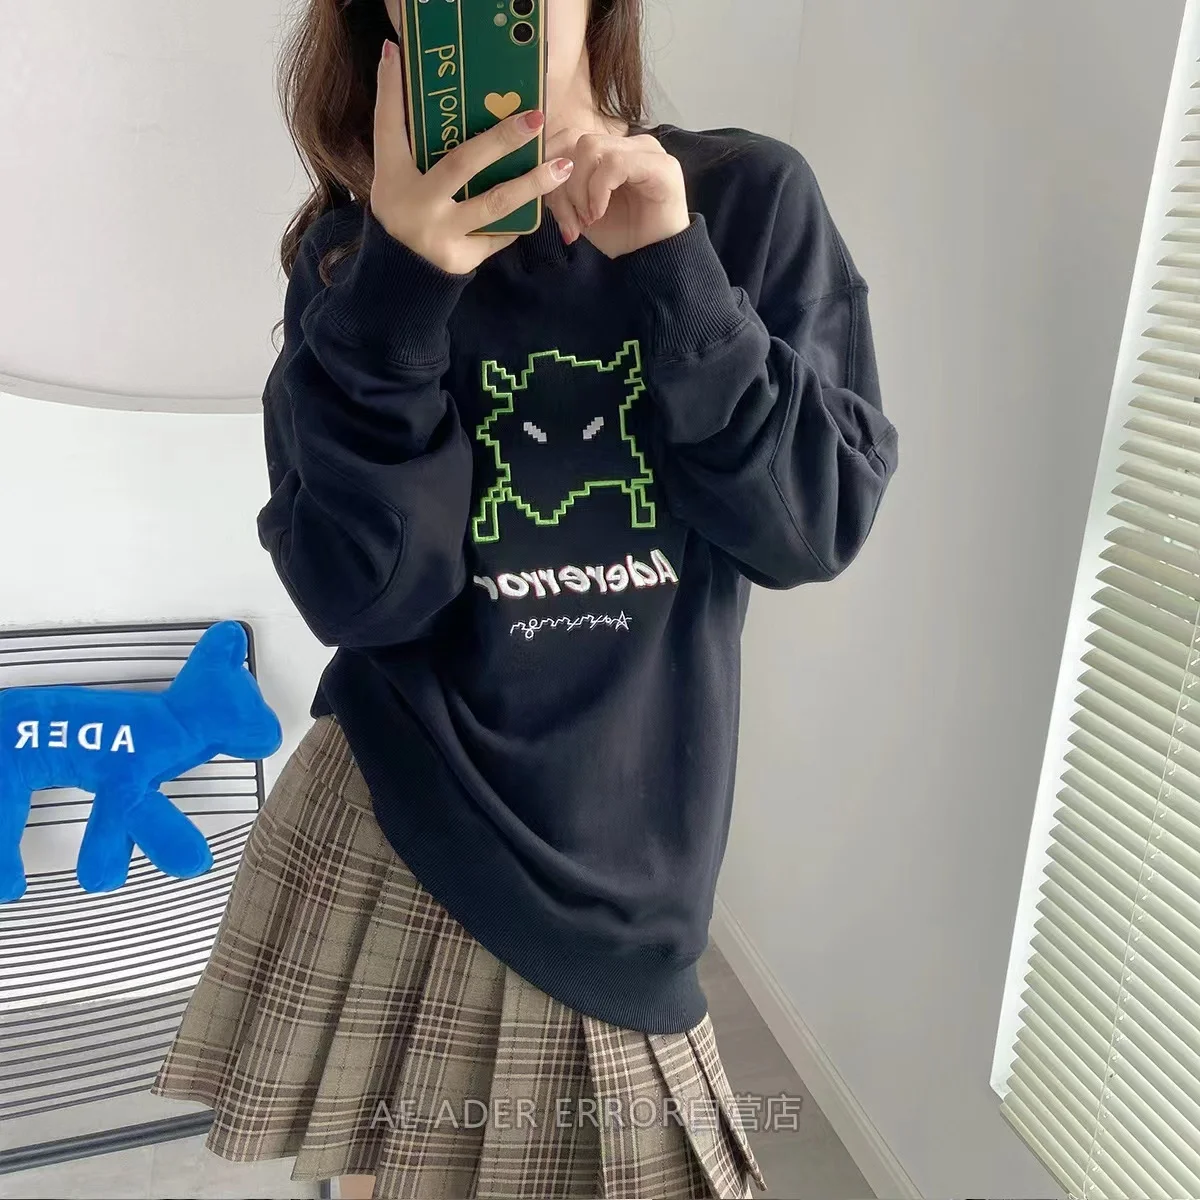 sweater high-quality ADER ERROR small monster embroidery loose casual all-match men and women couples long-sleeved oversized top